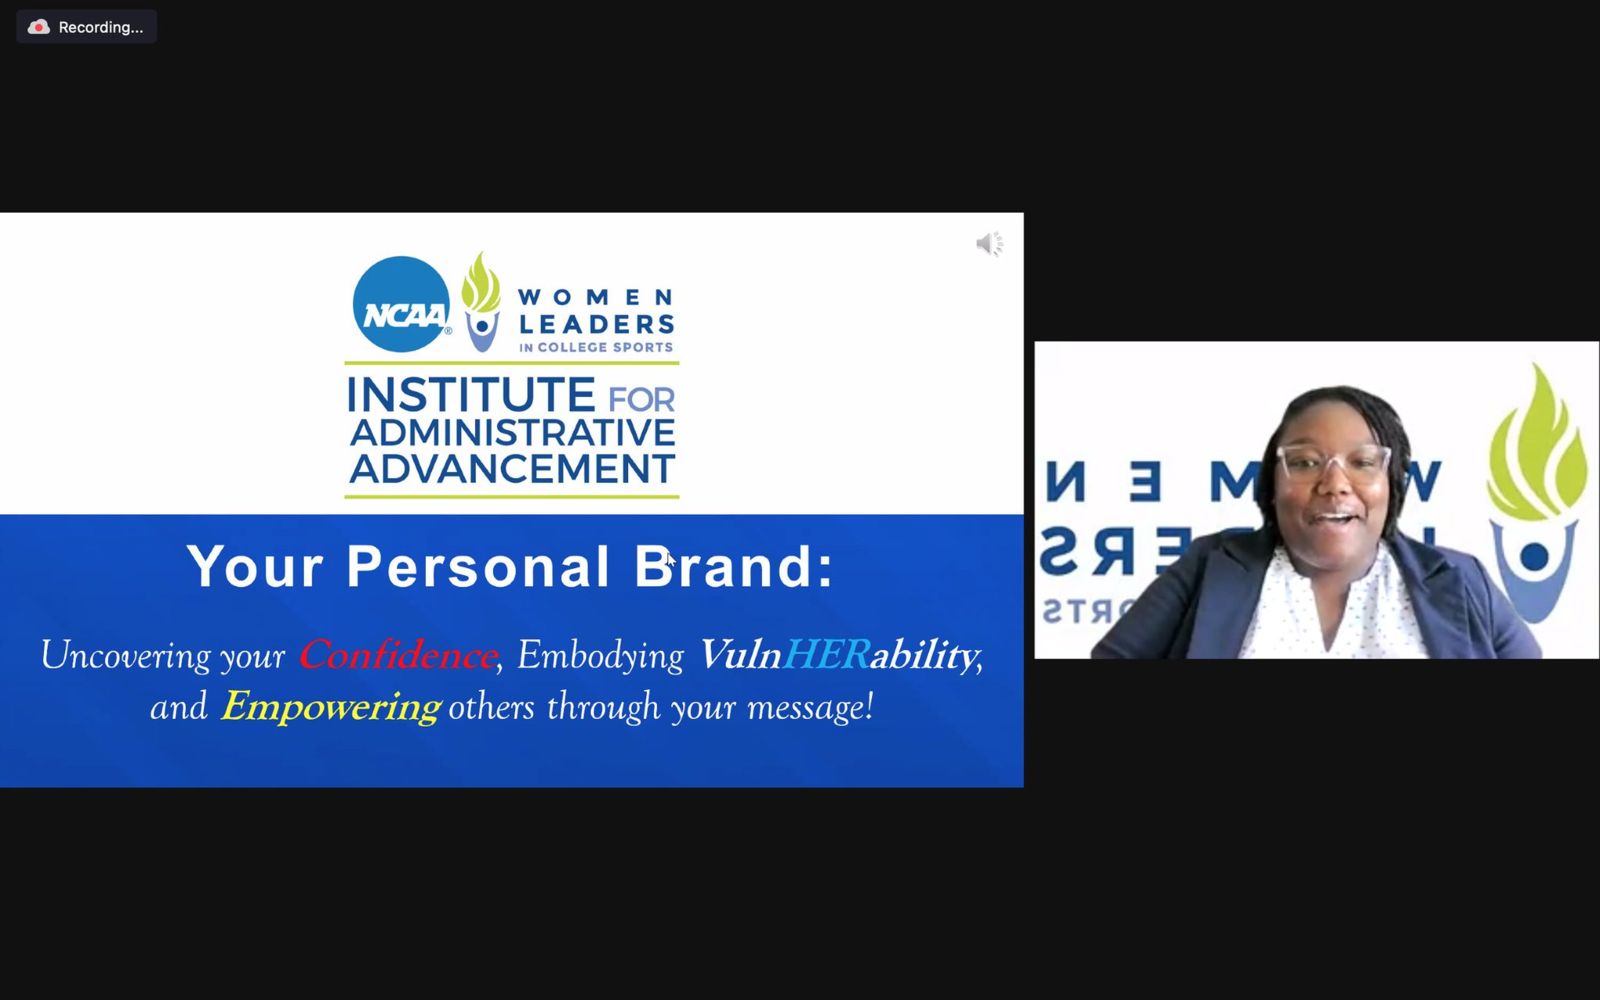 Tweedy served as an IAA event speaker and gave a presentation focused on personal branding.    